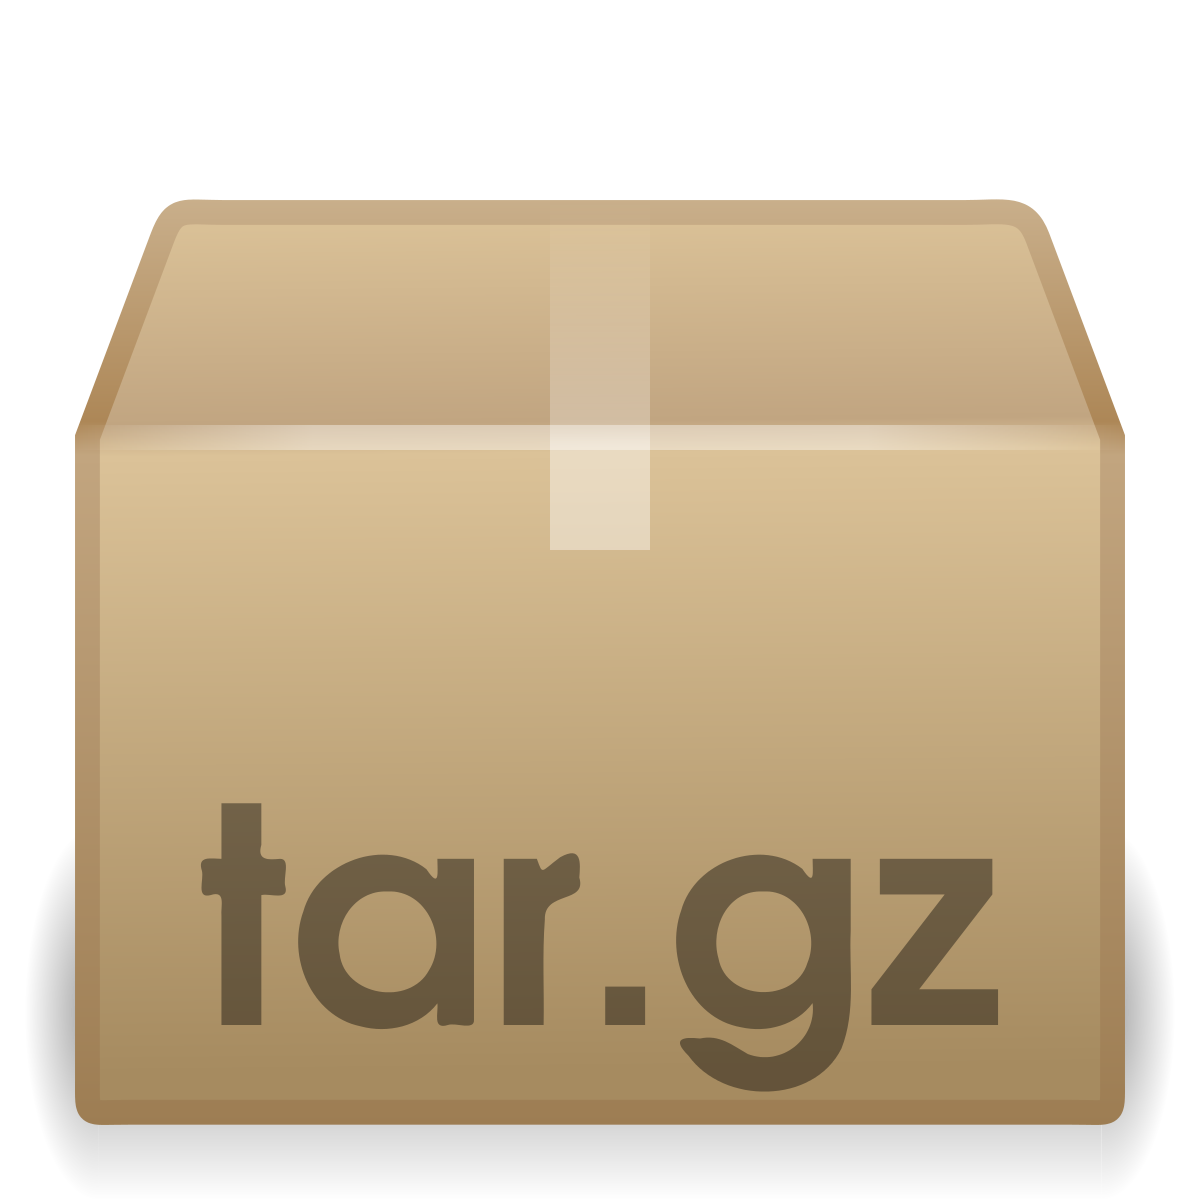 How to Unzip/Extract tar.gz Files in Linux {Basic tar commands} 3